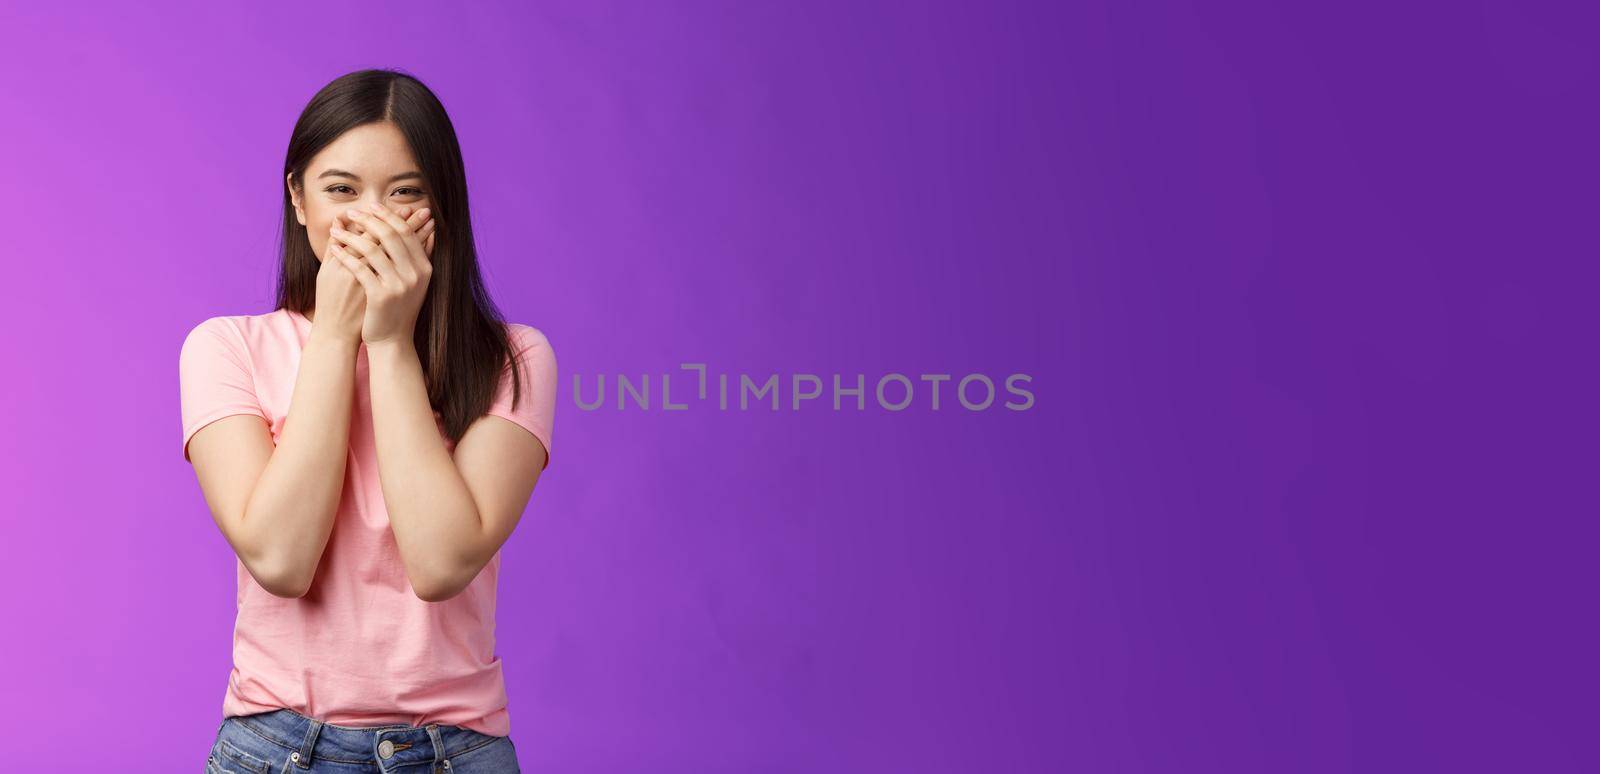 Cute carefree happy young asian girlfriend fooling around, giggle, close mouth palms not laugh loud, acting silly childish, joking, blushing receive surprising cute present, stand purple background.